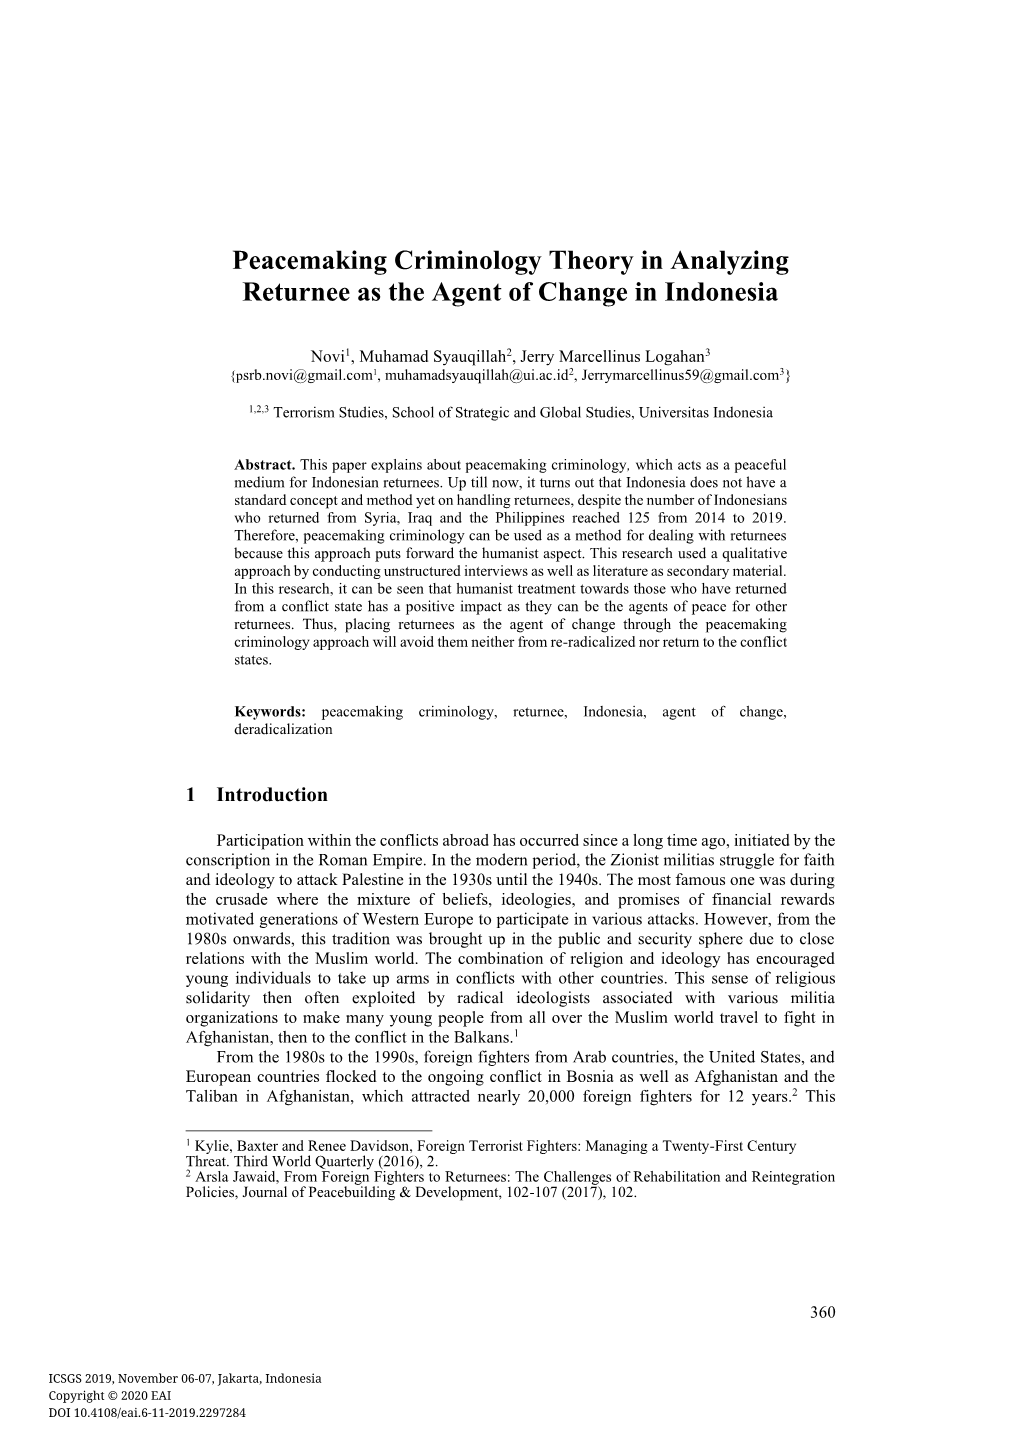 Peacemaking Criminology Theory in Analyzing Returnee As the Agent of Change in Indonesia